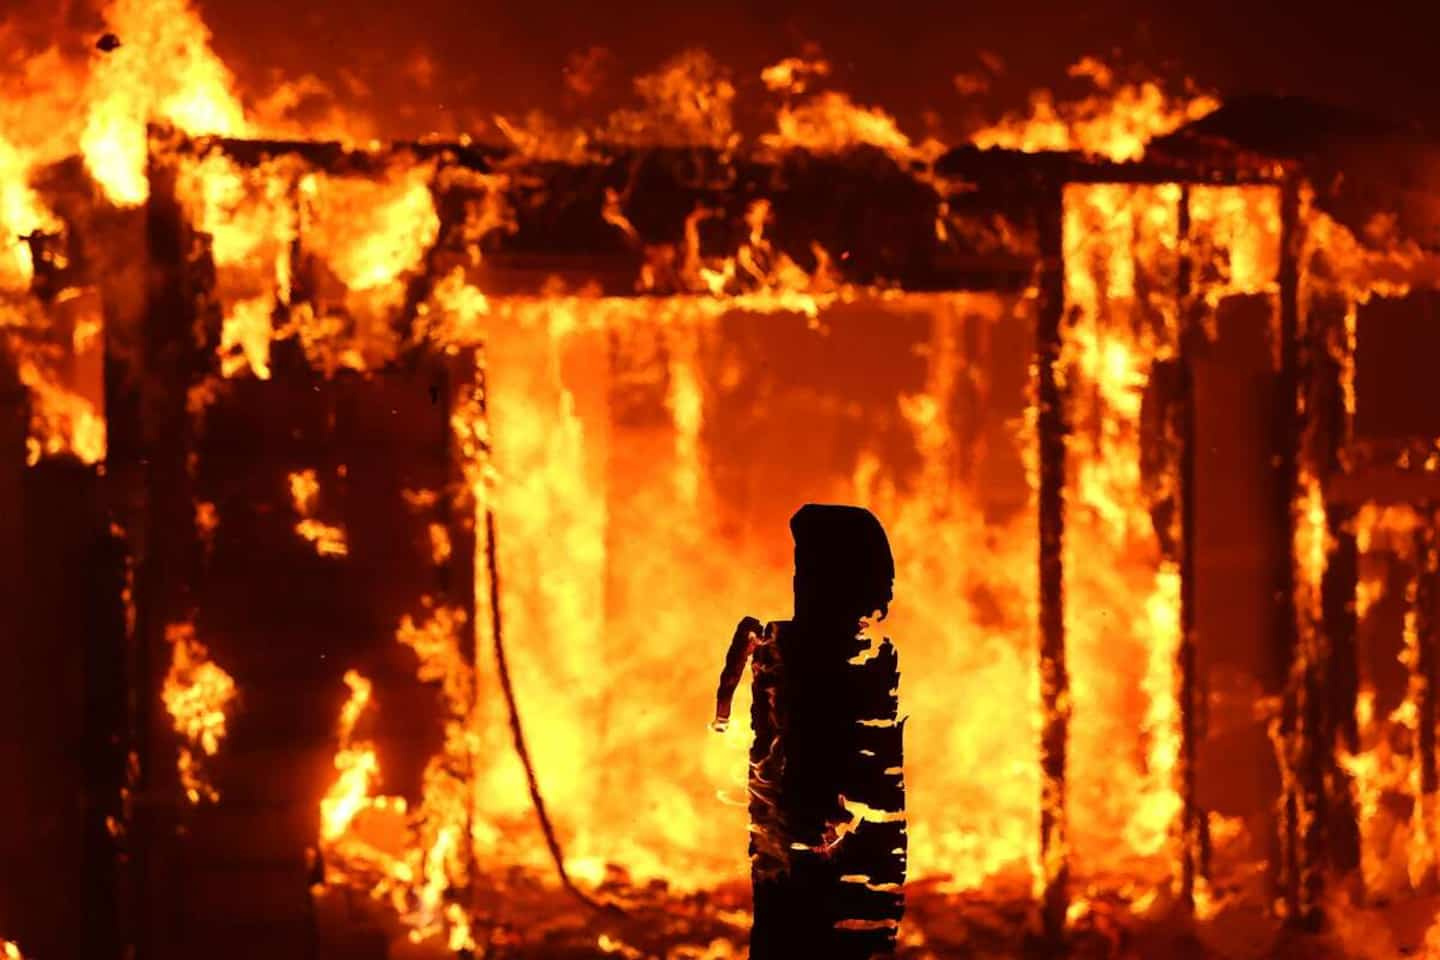 [IN IMAGES] The United States faces extreme temperatures, fire in California